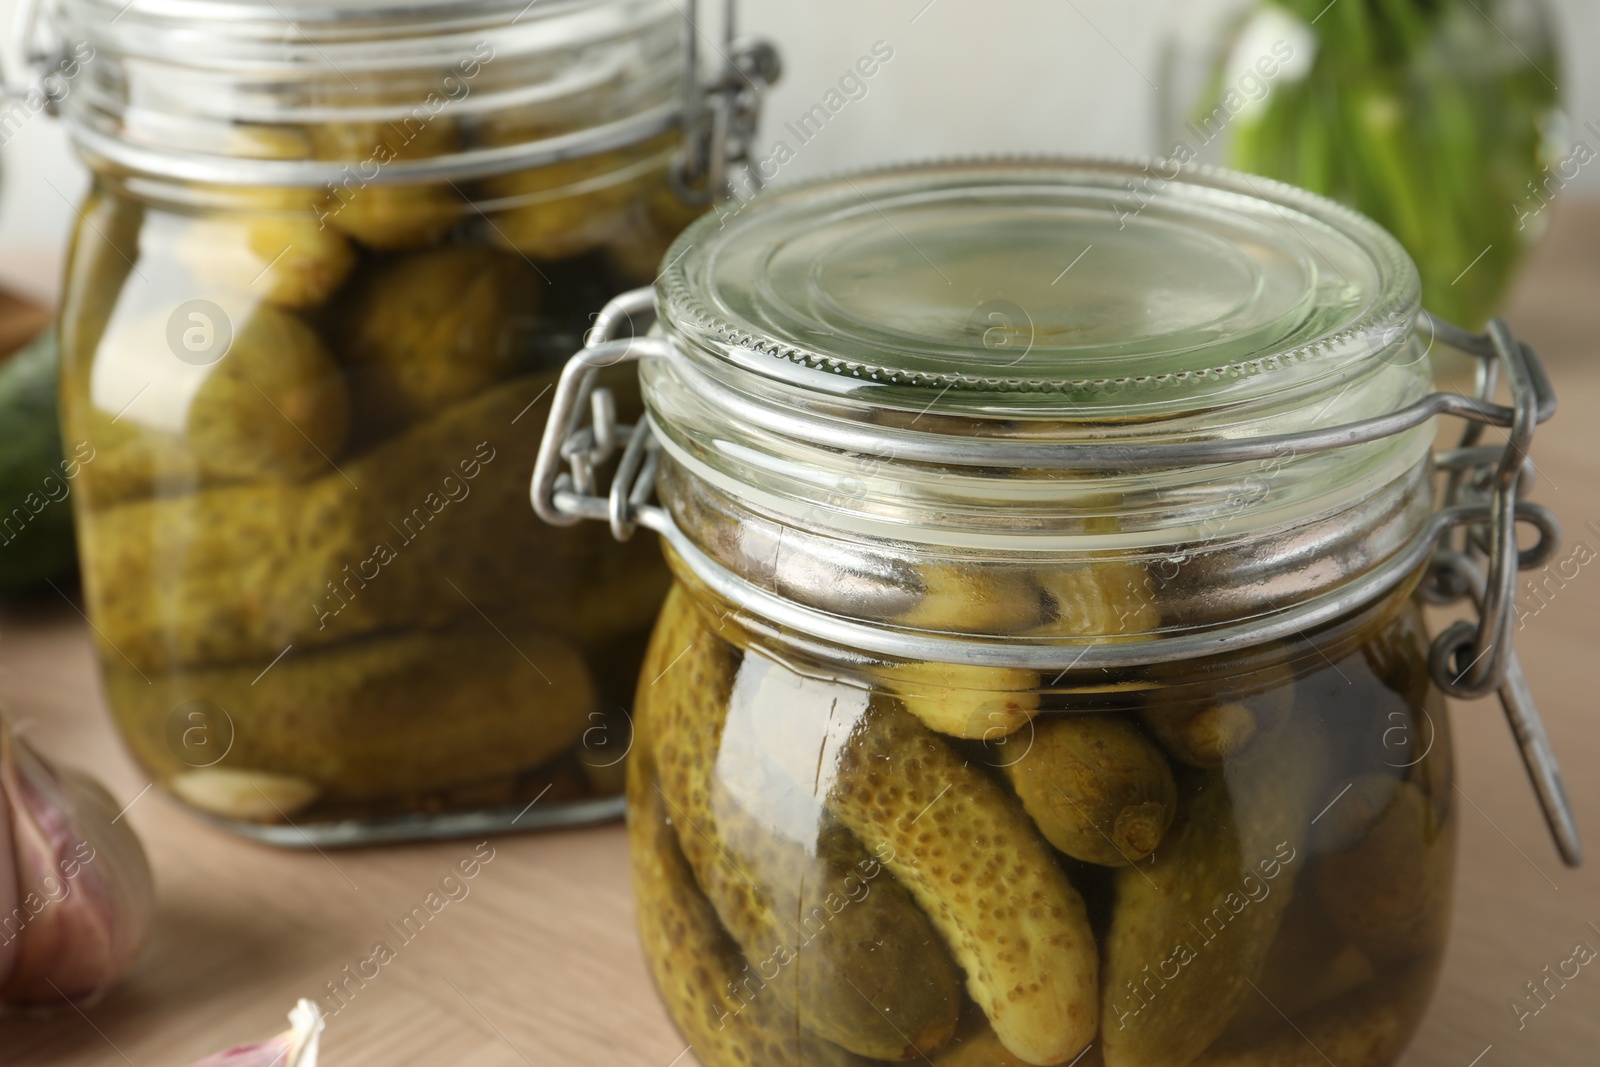 Photo of Pickled cucumbers in jars on wooden table, closeup